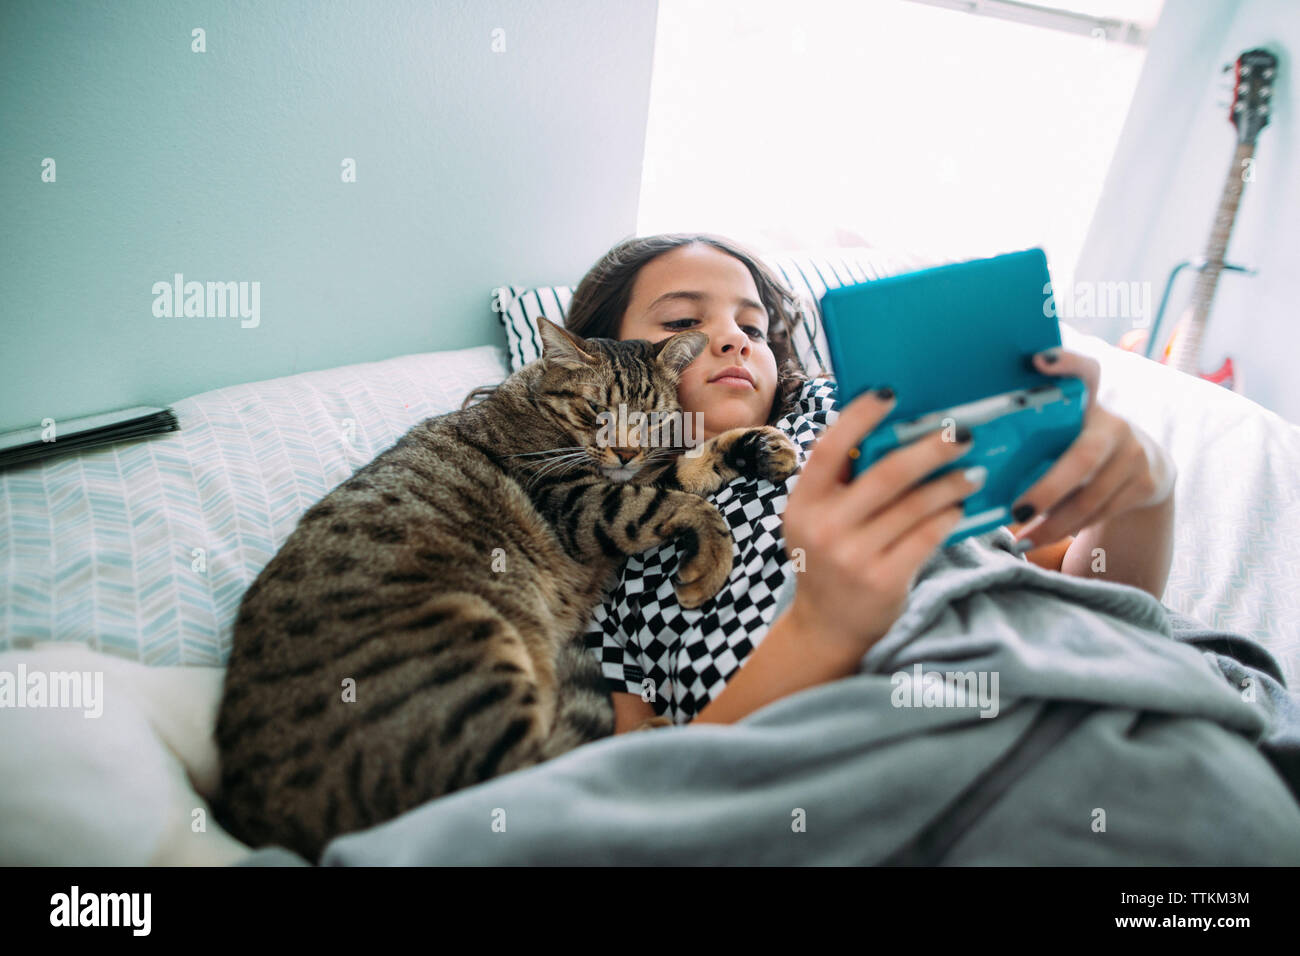 High angle view of girl playing video game en position couchée avec cat on bed at home Banque D'Images